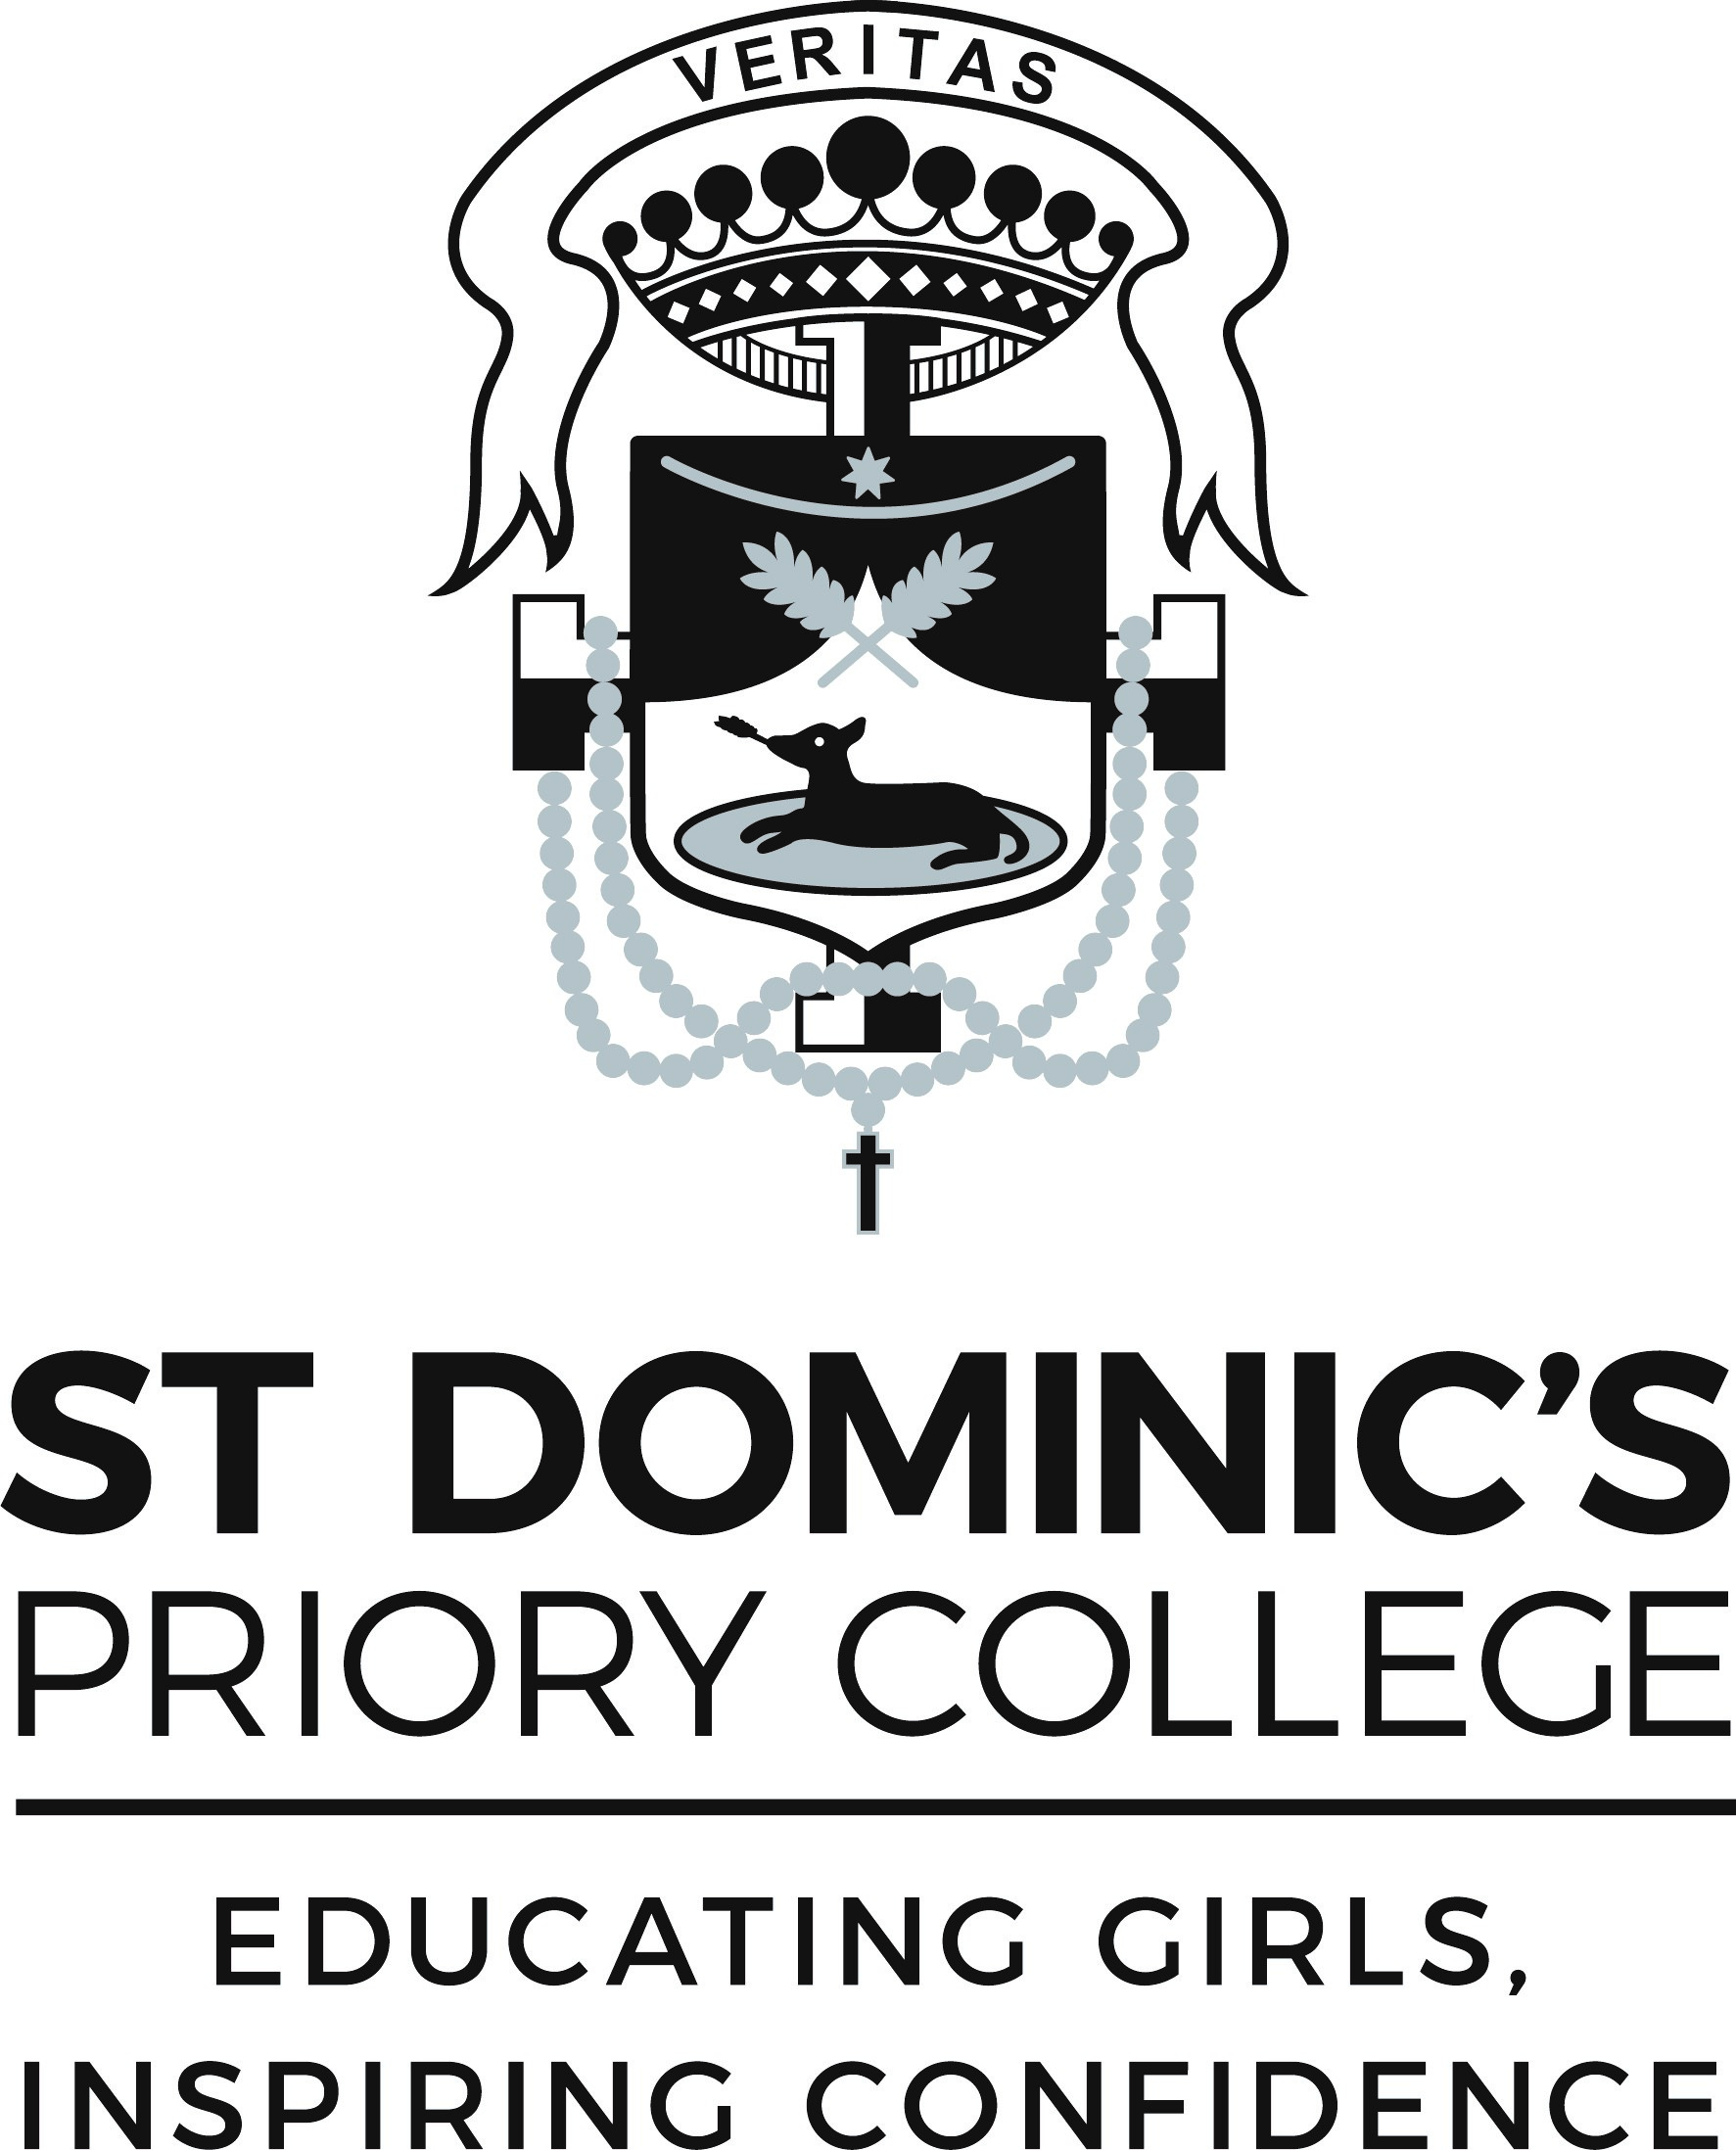 St Dominic's Priory College